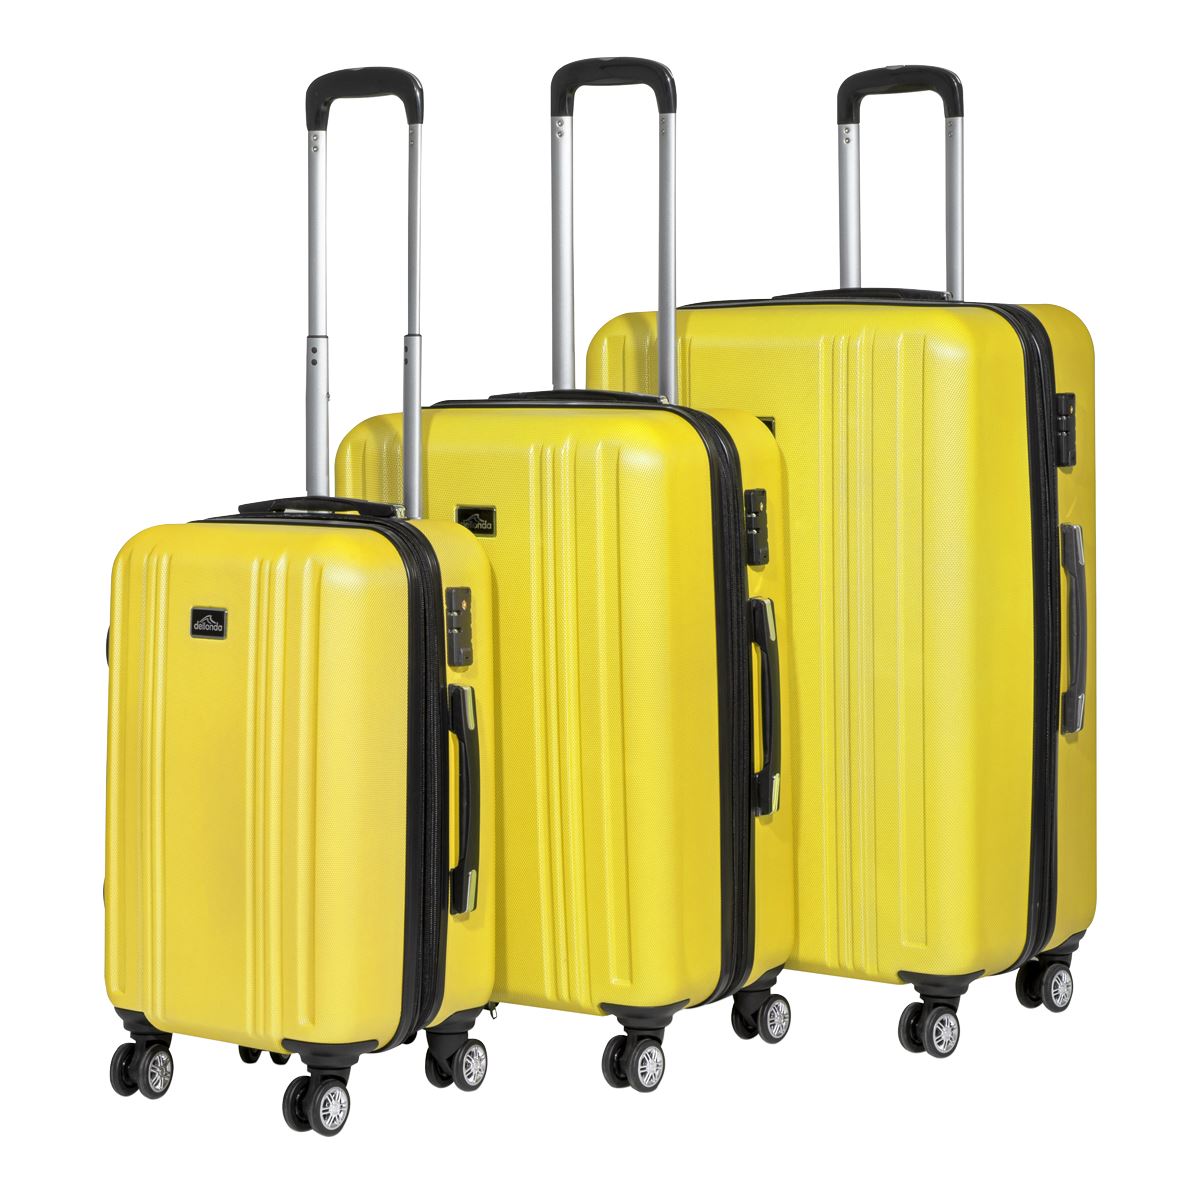 Dellonda 3-Piece ABS Luggage Set with Integrated TSA Approved Combination Lock - Yellow - DL124